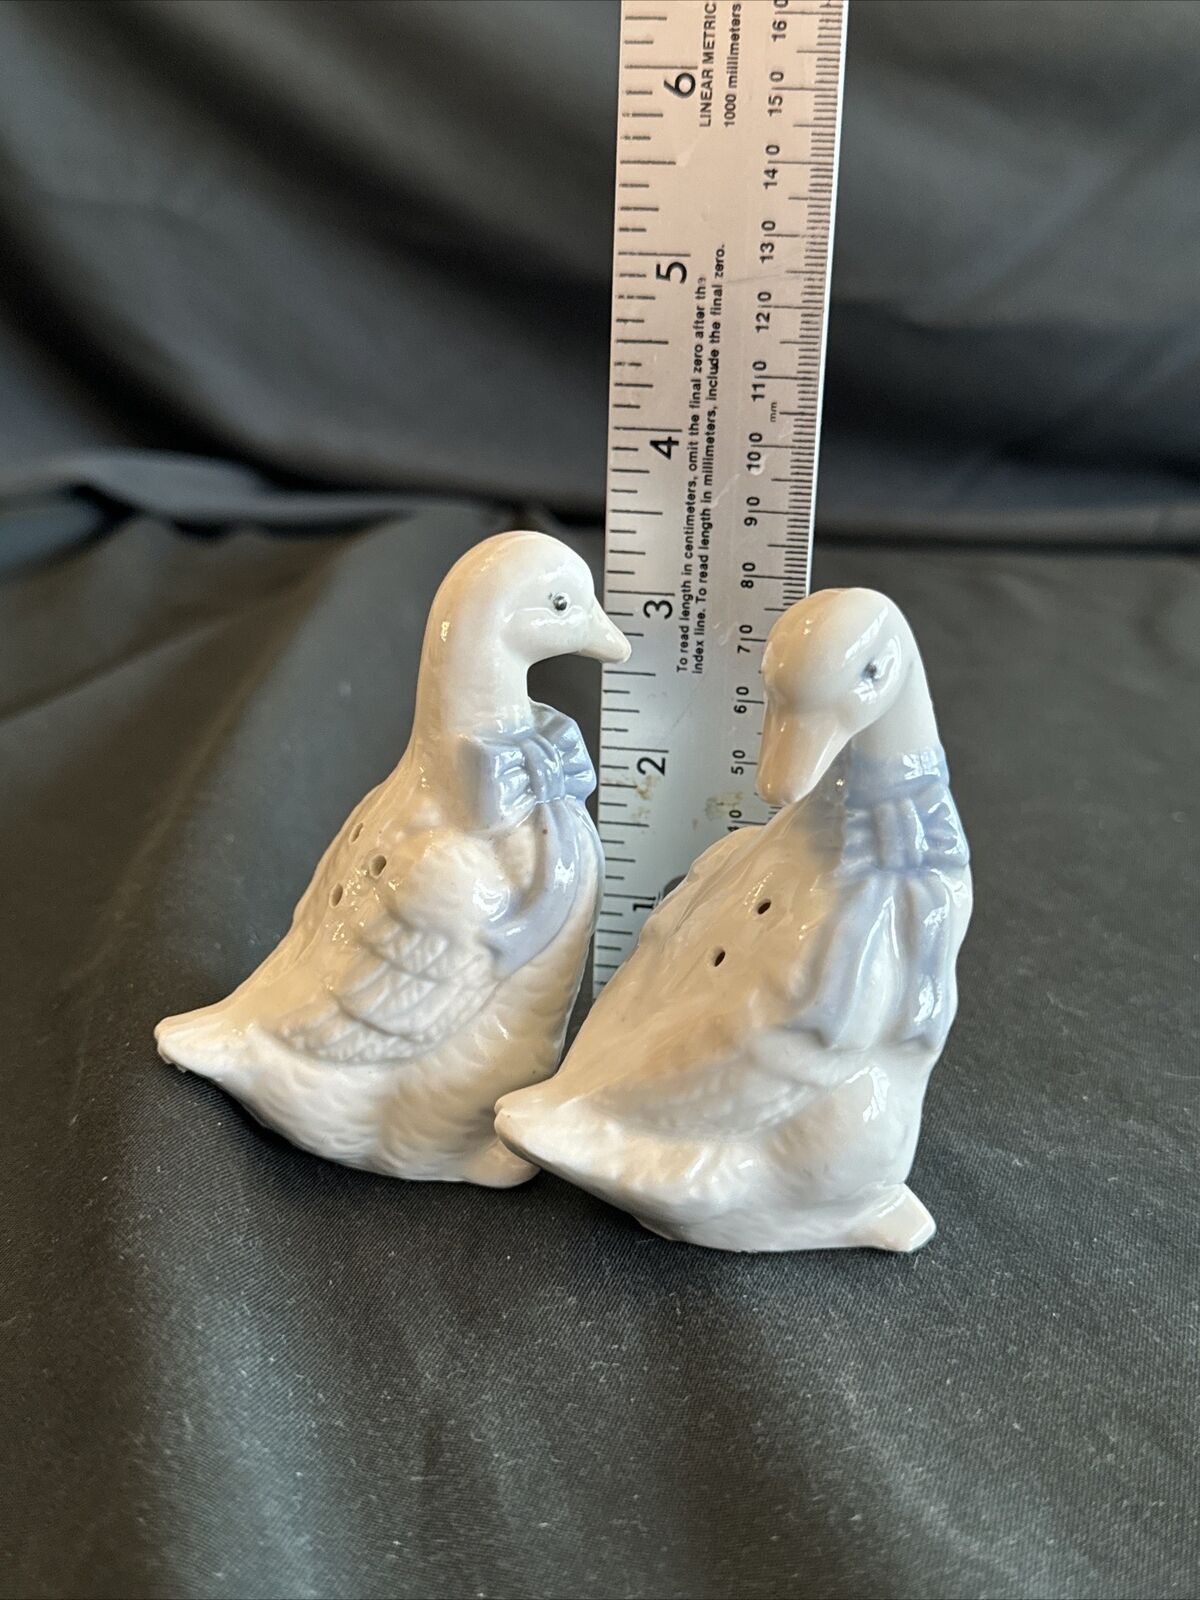 Vintage Goose Salt And Pepper Shakers, White With Blue How